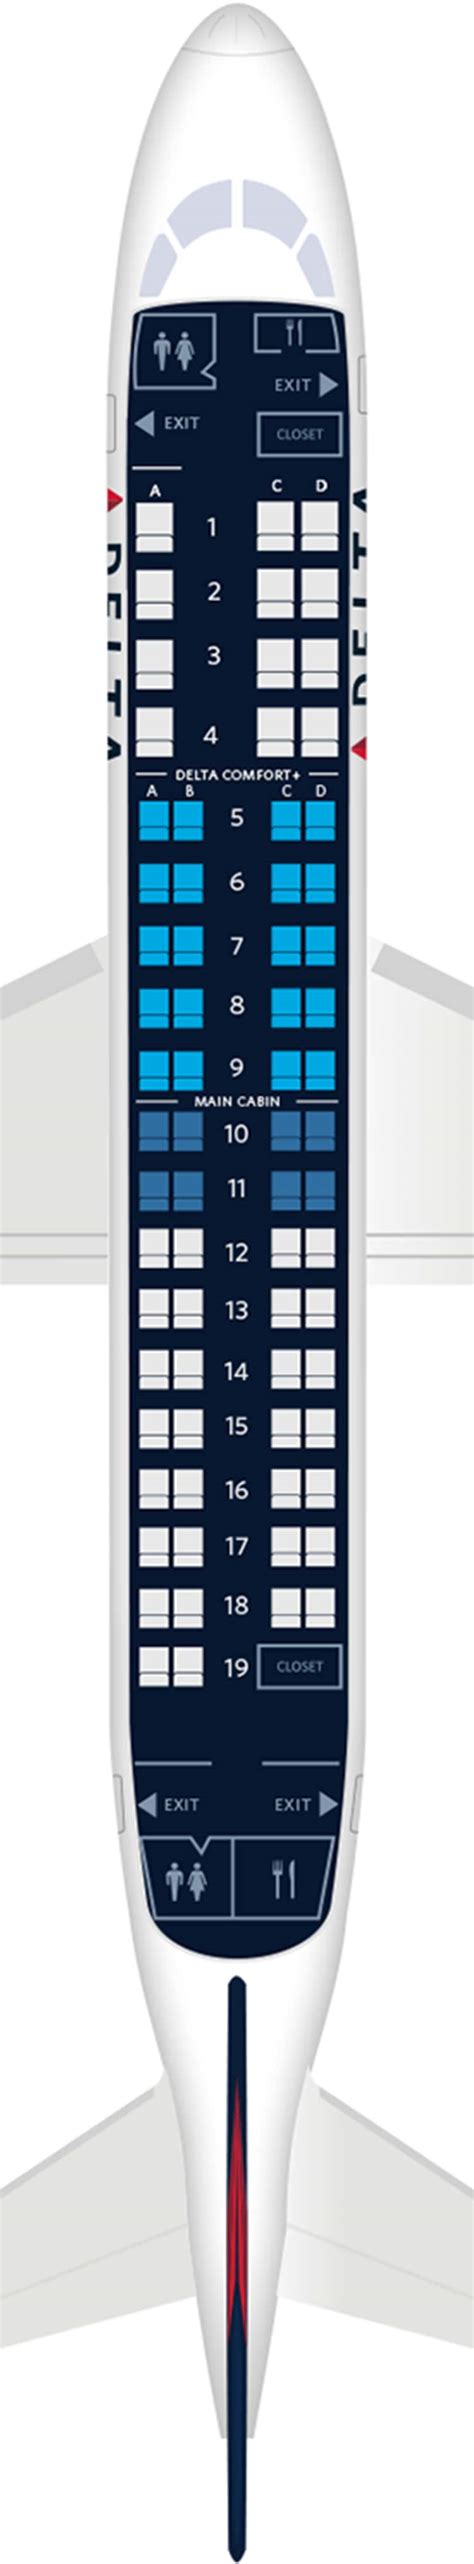 Aa 175 seat map. 38. 38. 39. 39. 40. 40. View all available seats on your next American Airlines flight. Our comprehensive seat maps and seating charts on AA.com display seat availability for every aircraft type. 